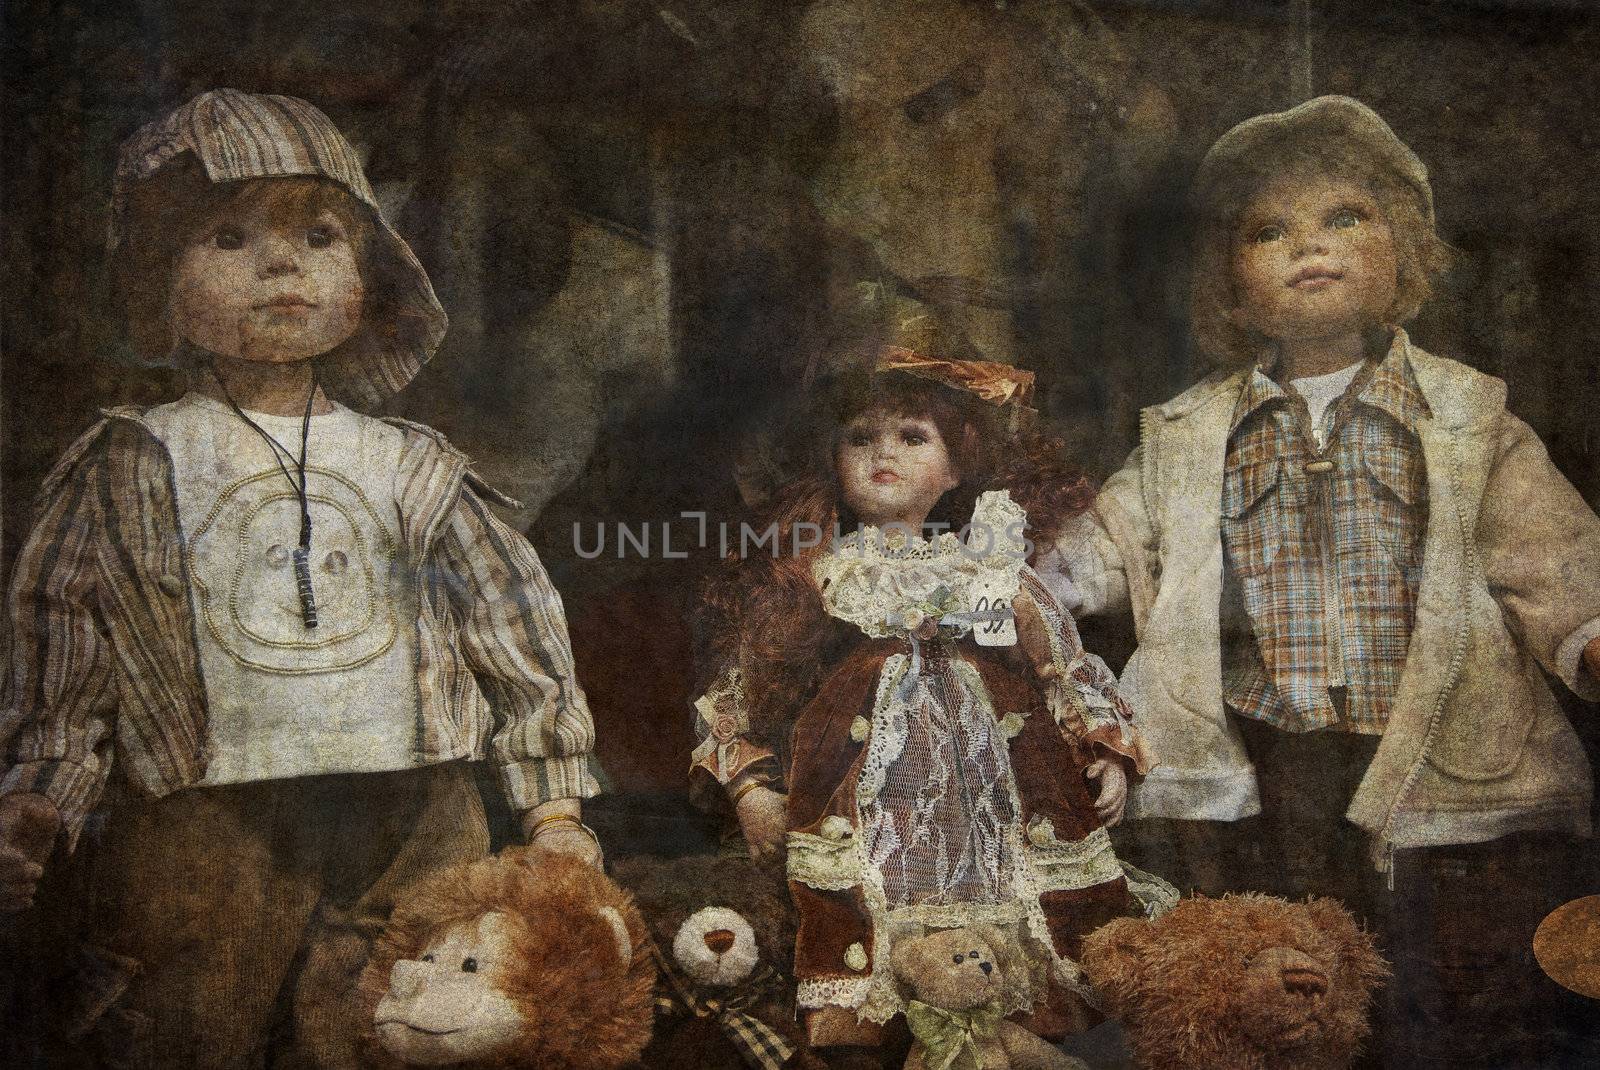 Dream of the old Parisian toy shop. Postcard from Pars. More of my images worked together to reflect age and time.